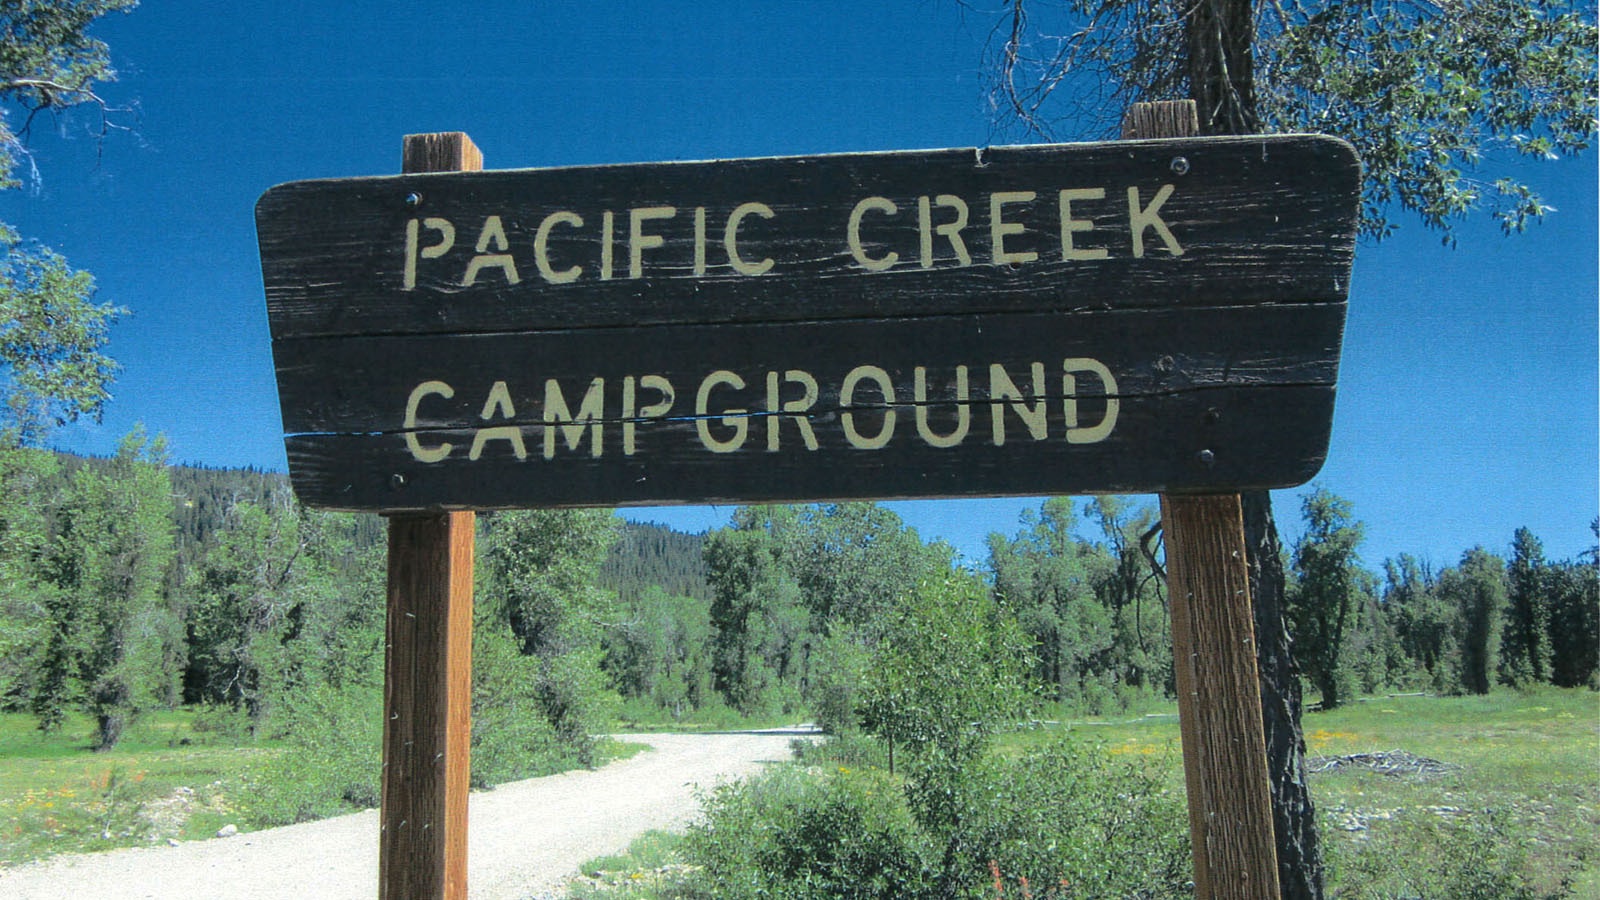 The Pacific Creek Campground in the Bridger Teton National Forest of Wyoming.